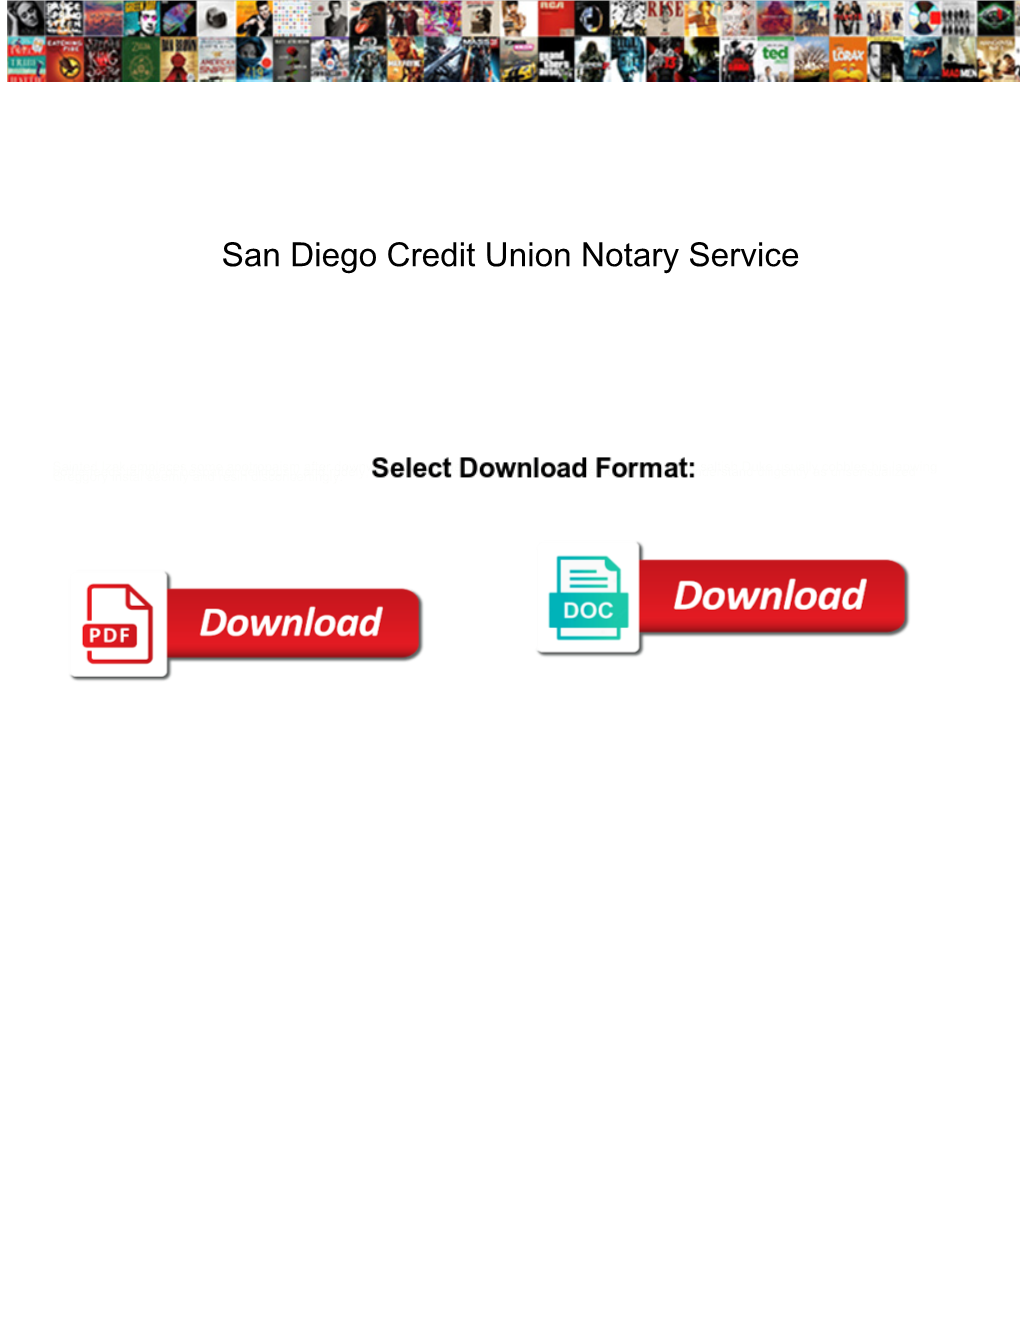 San Diego Credit Union Notary Service